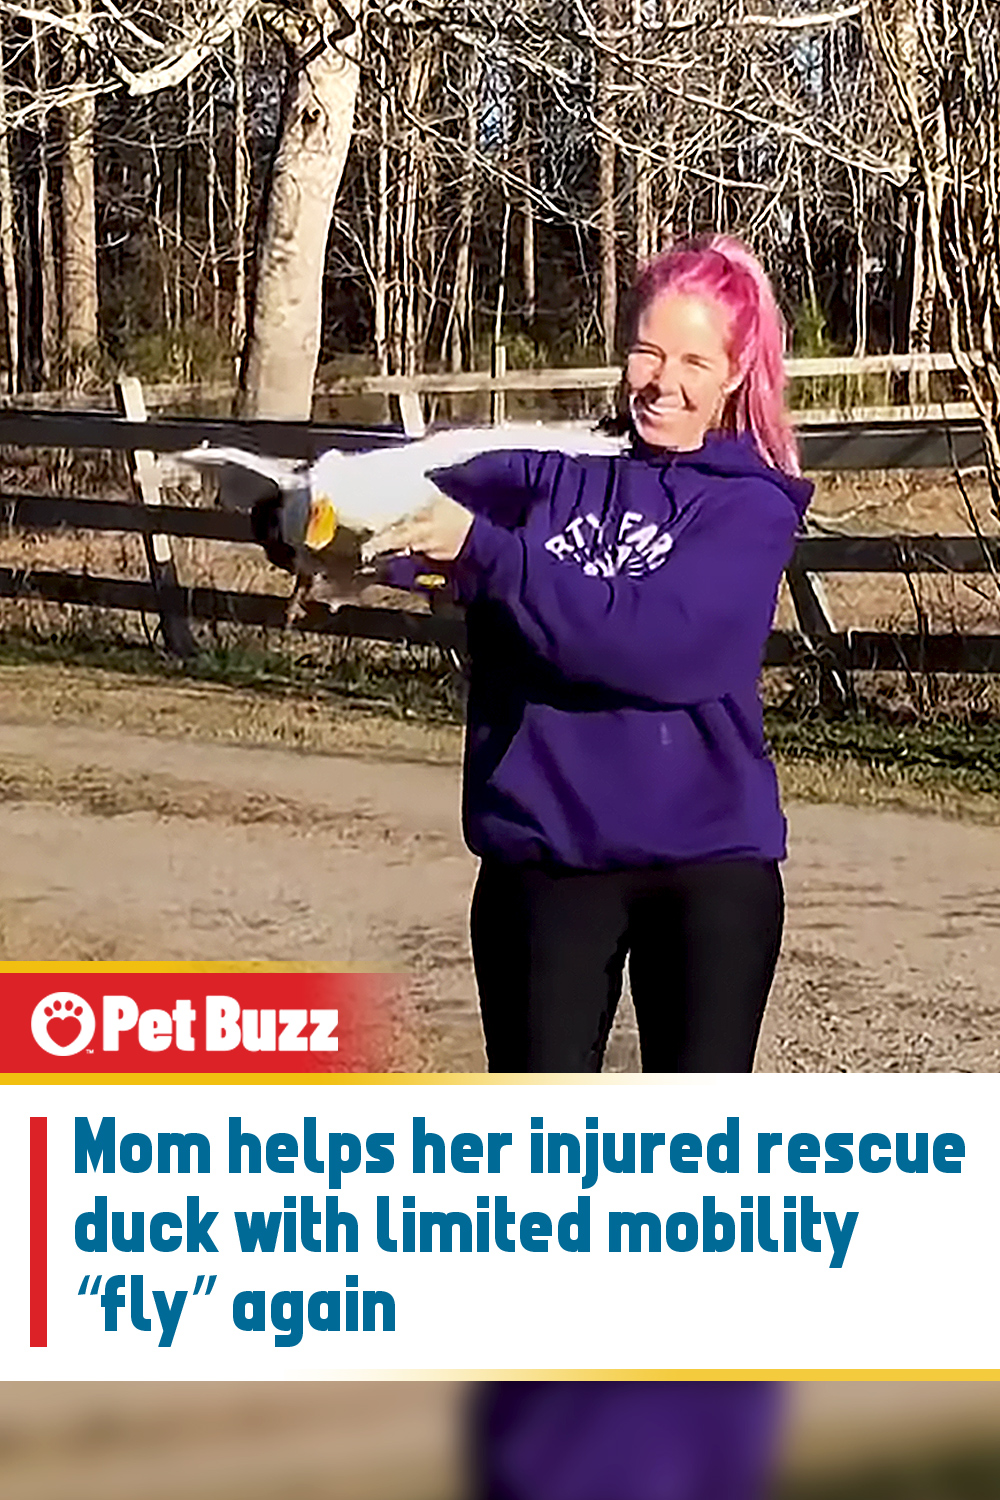 Mom helps her injured rescue duck with limited mobility “fly” again